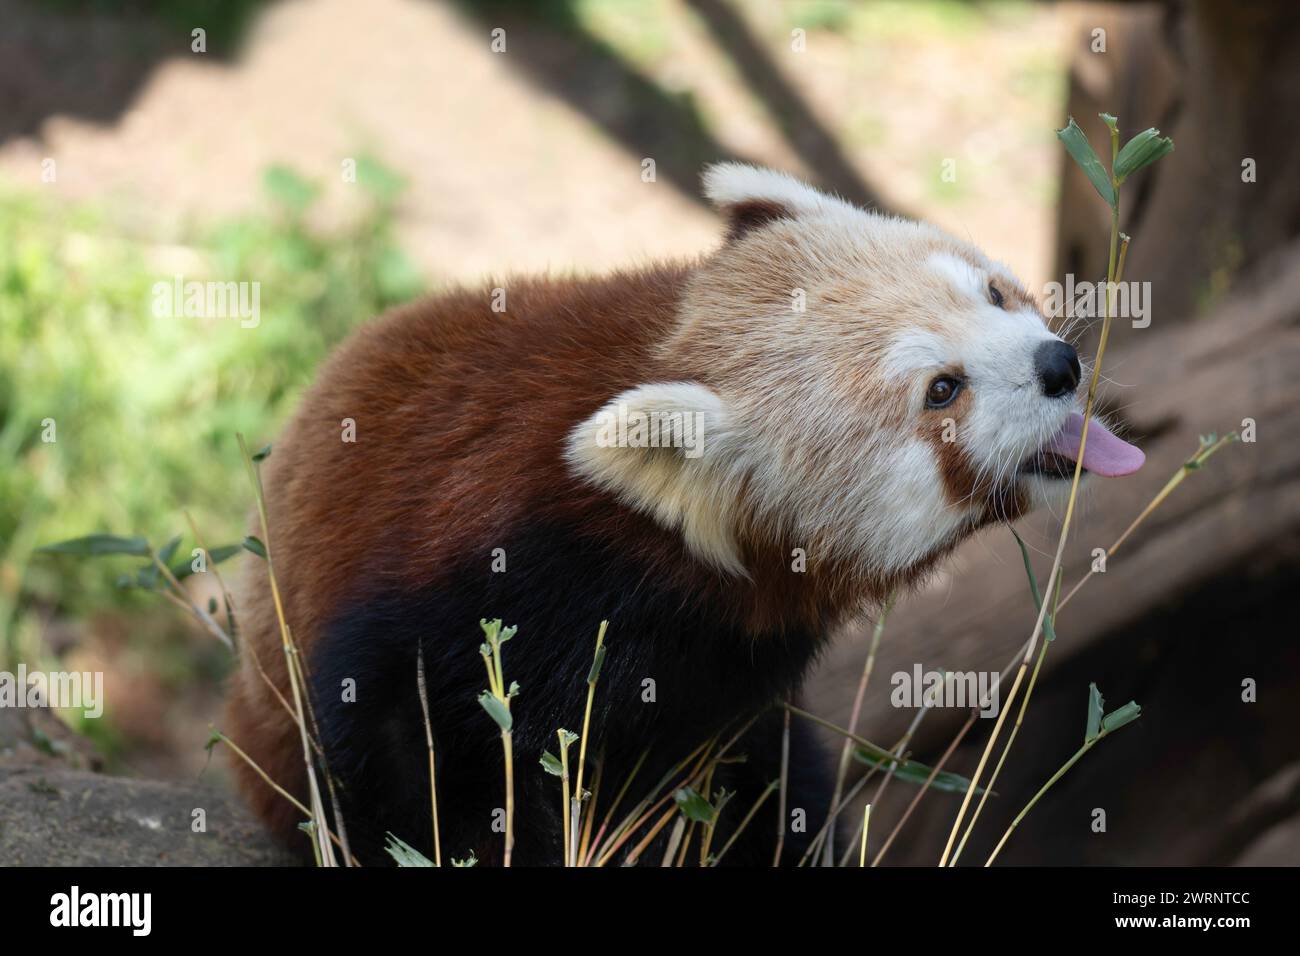 The red panda, also called the lesser panda, the red bear-cat, and the red cat-bear, a mammal native to the eastern Himalayas and southwestern China. Stock Photo